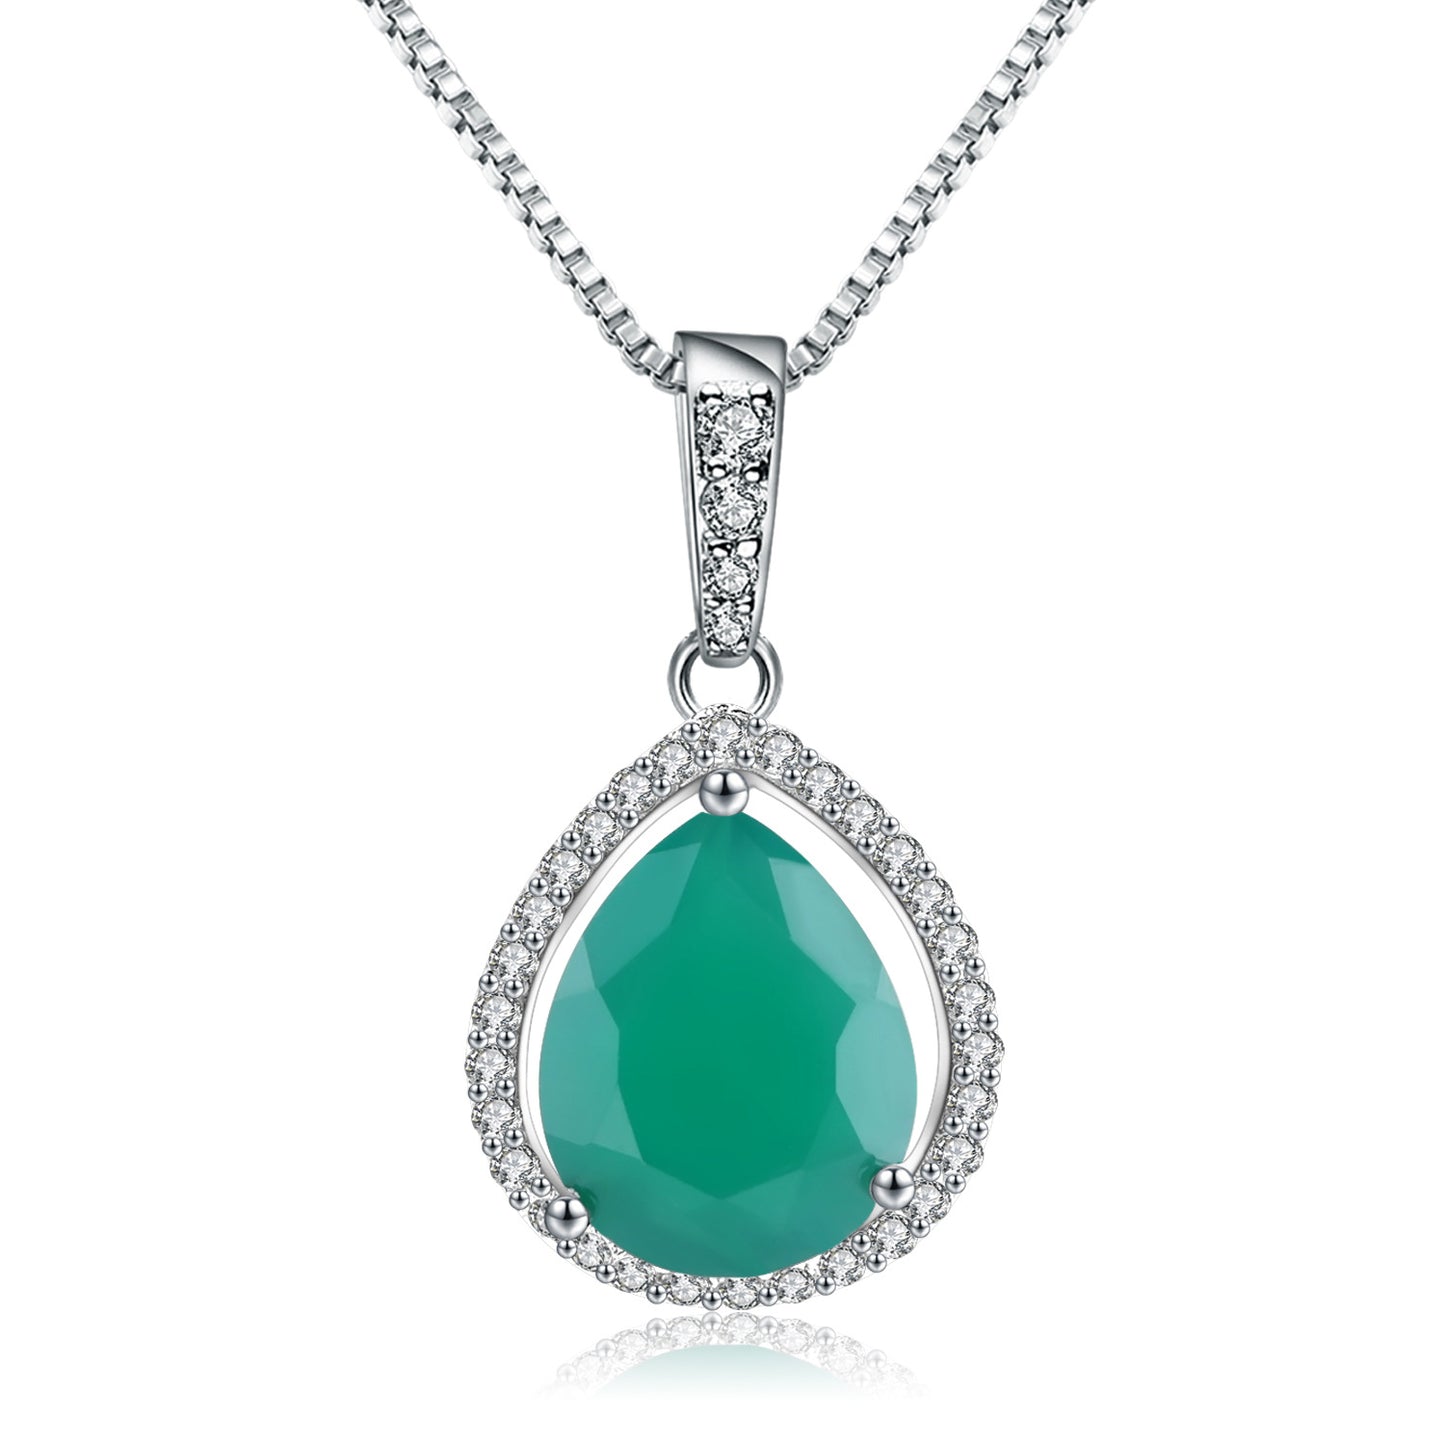 Luxury Charm Style Inlaid Green Agate Soleste Halo Pear Drop Pendant Sterling Silver Necklace for Women